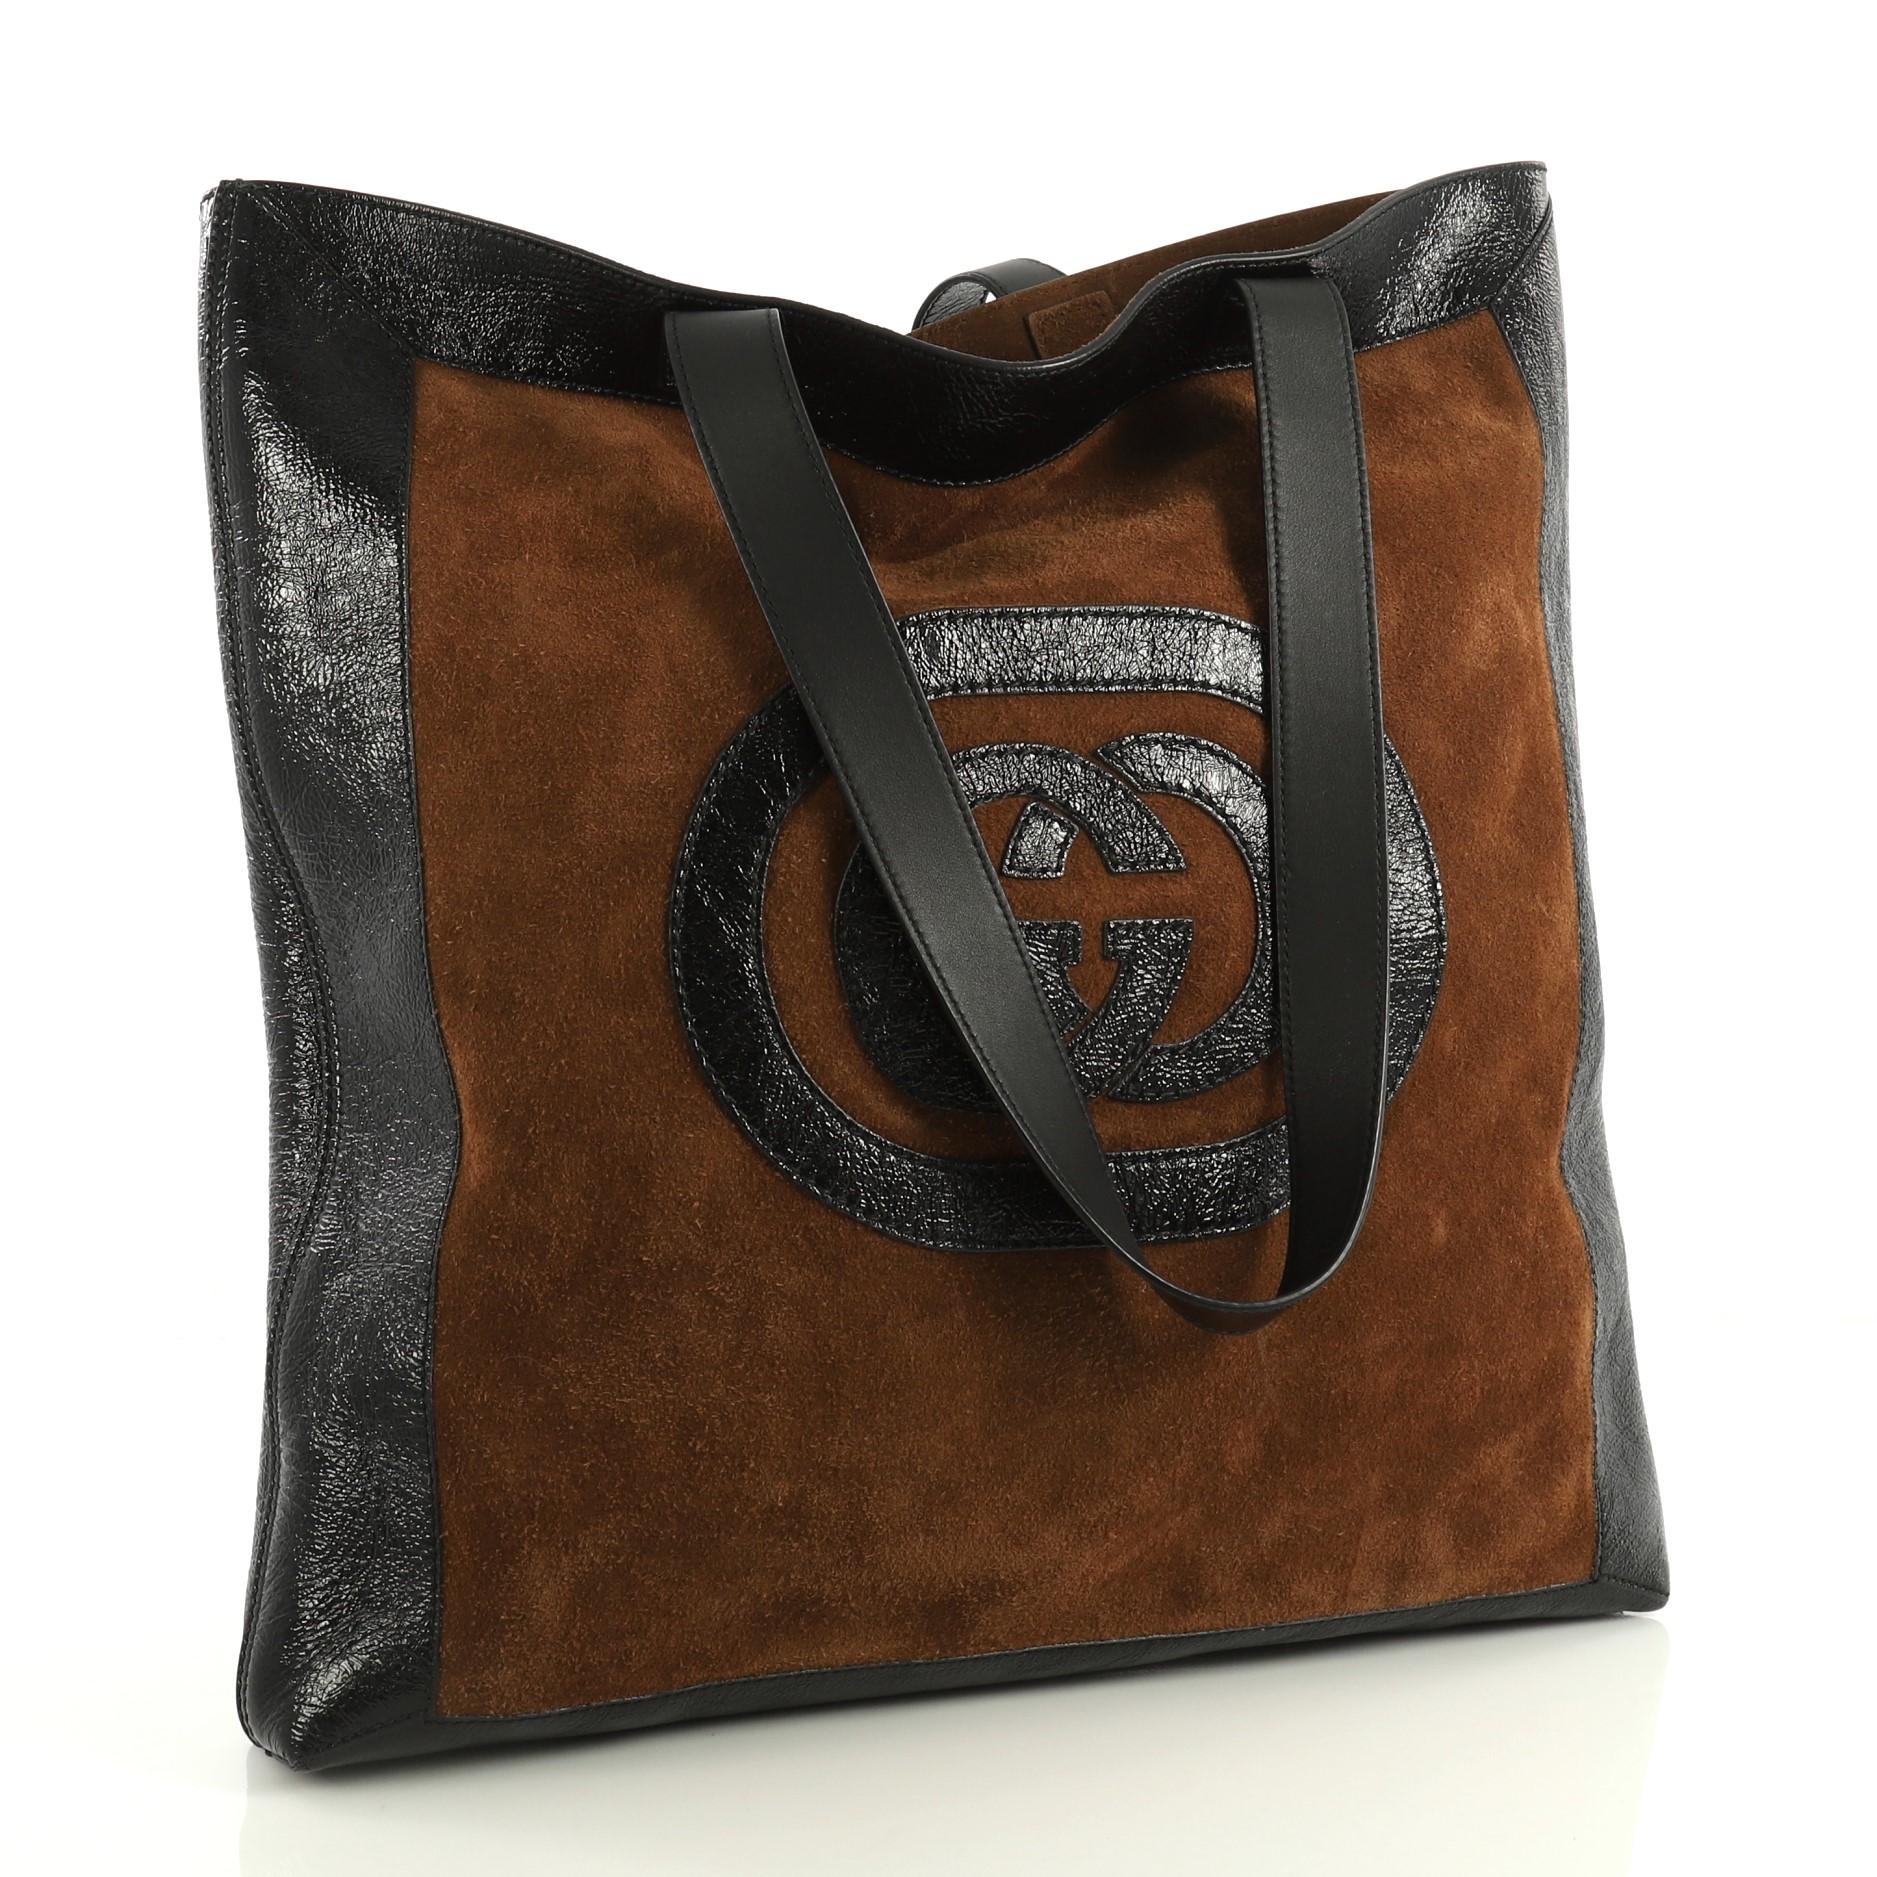 This Gucci Ophidia Soft Open Tote Suede Large, crafted in brown suede, features dual flat leather handles, leather trim, and aged gold-tone hardware. It opens to a brown suede interior. 

Estimated Retail Price: $2,290
Condition: Very good. Moderate